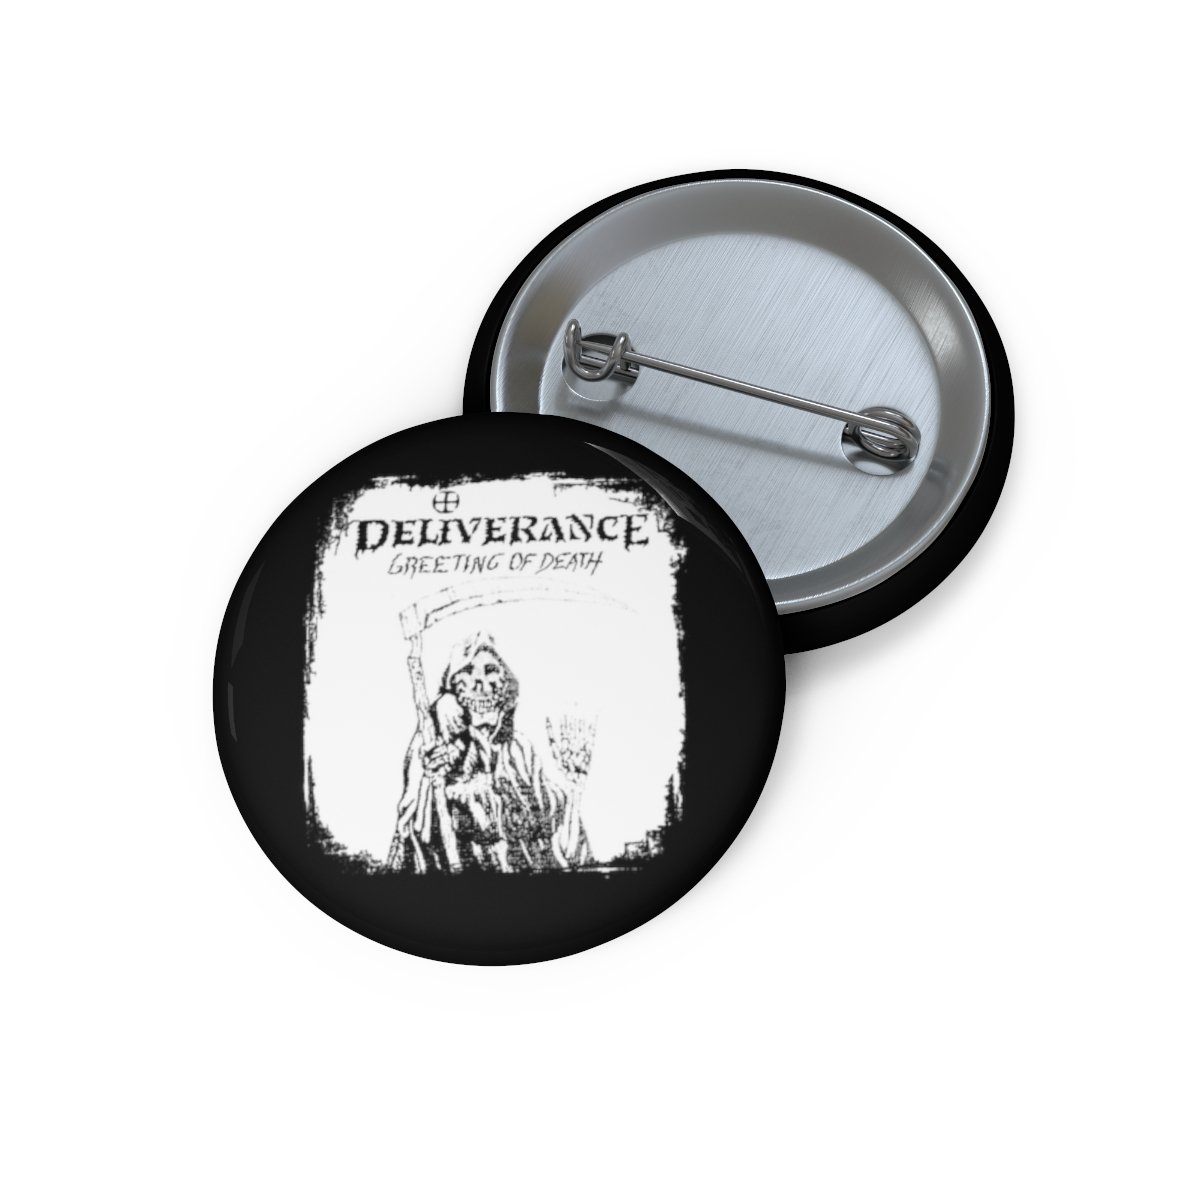 Deliverance – Greetings of Death Pin Buttons